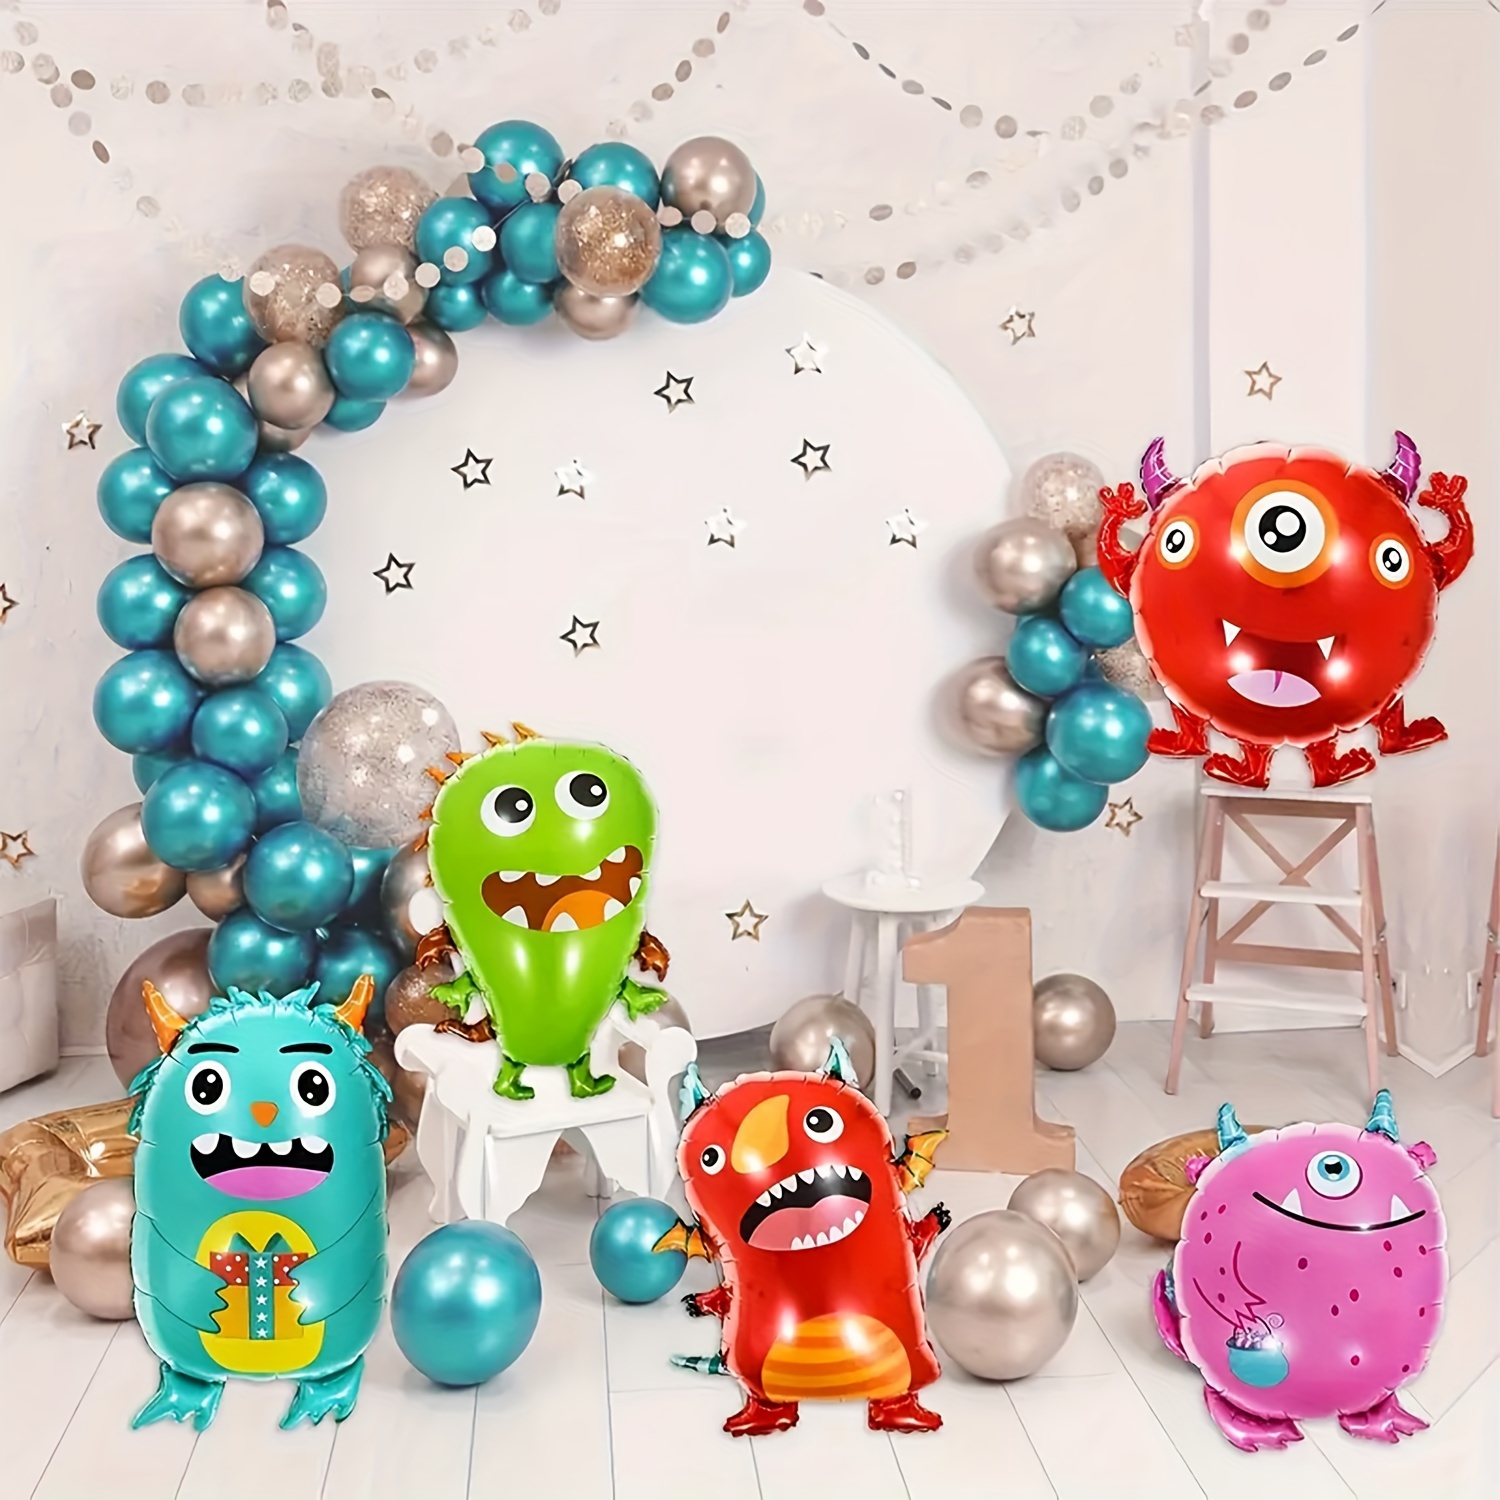 

Festive Monster Foil Balloons Set Of 5 - Suitable For Various Occasions, Ideal For 14+ Age Group - No Electricity Needed, Durable Aluminum Film - Perfect For Birthday Celebrations And Themed Events